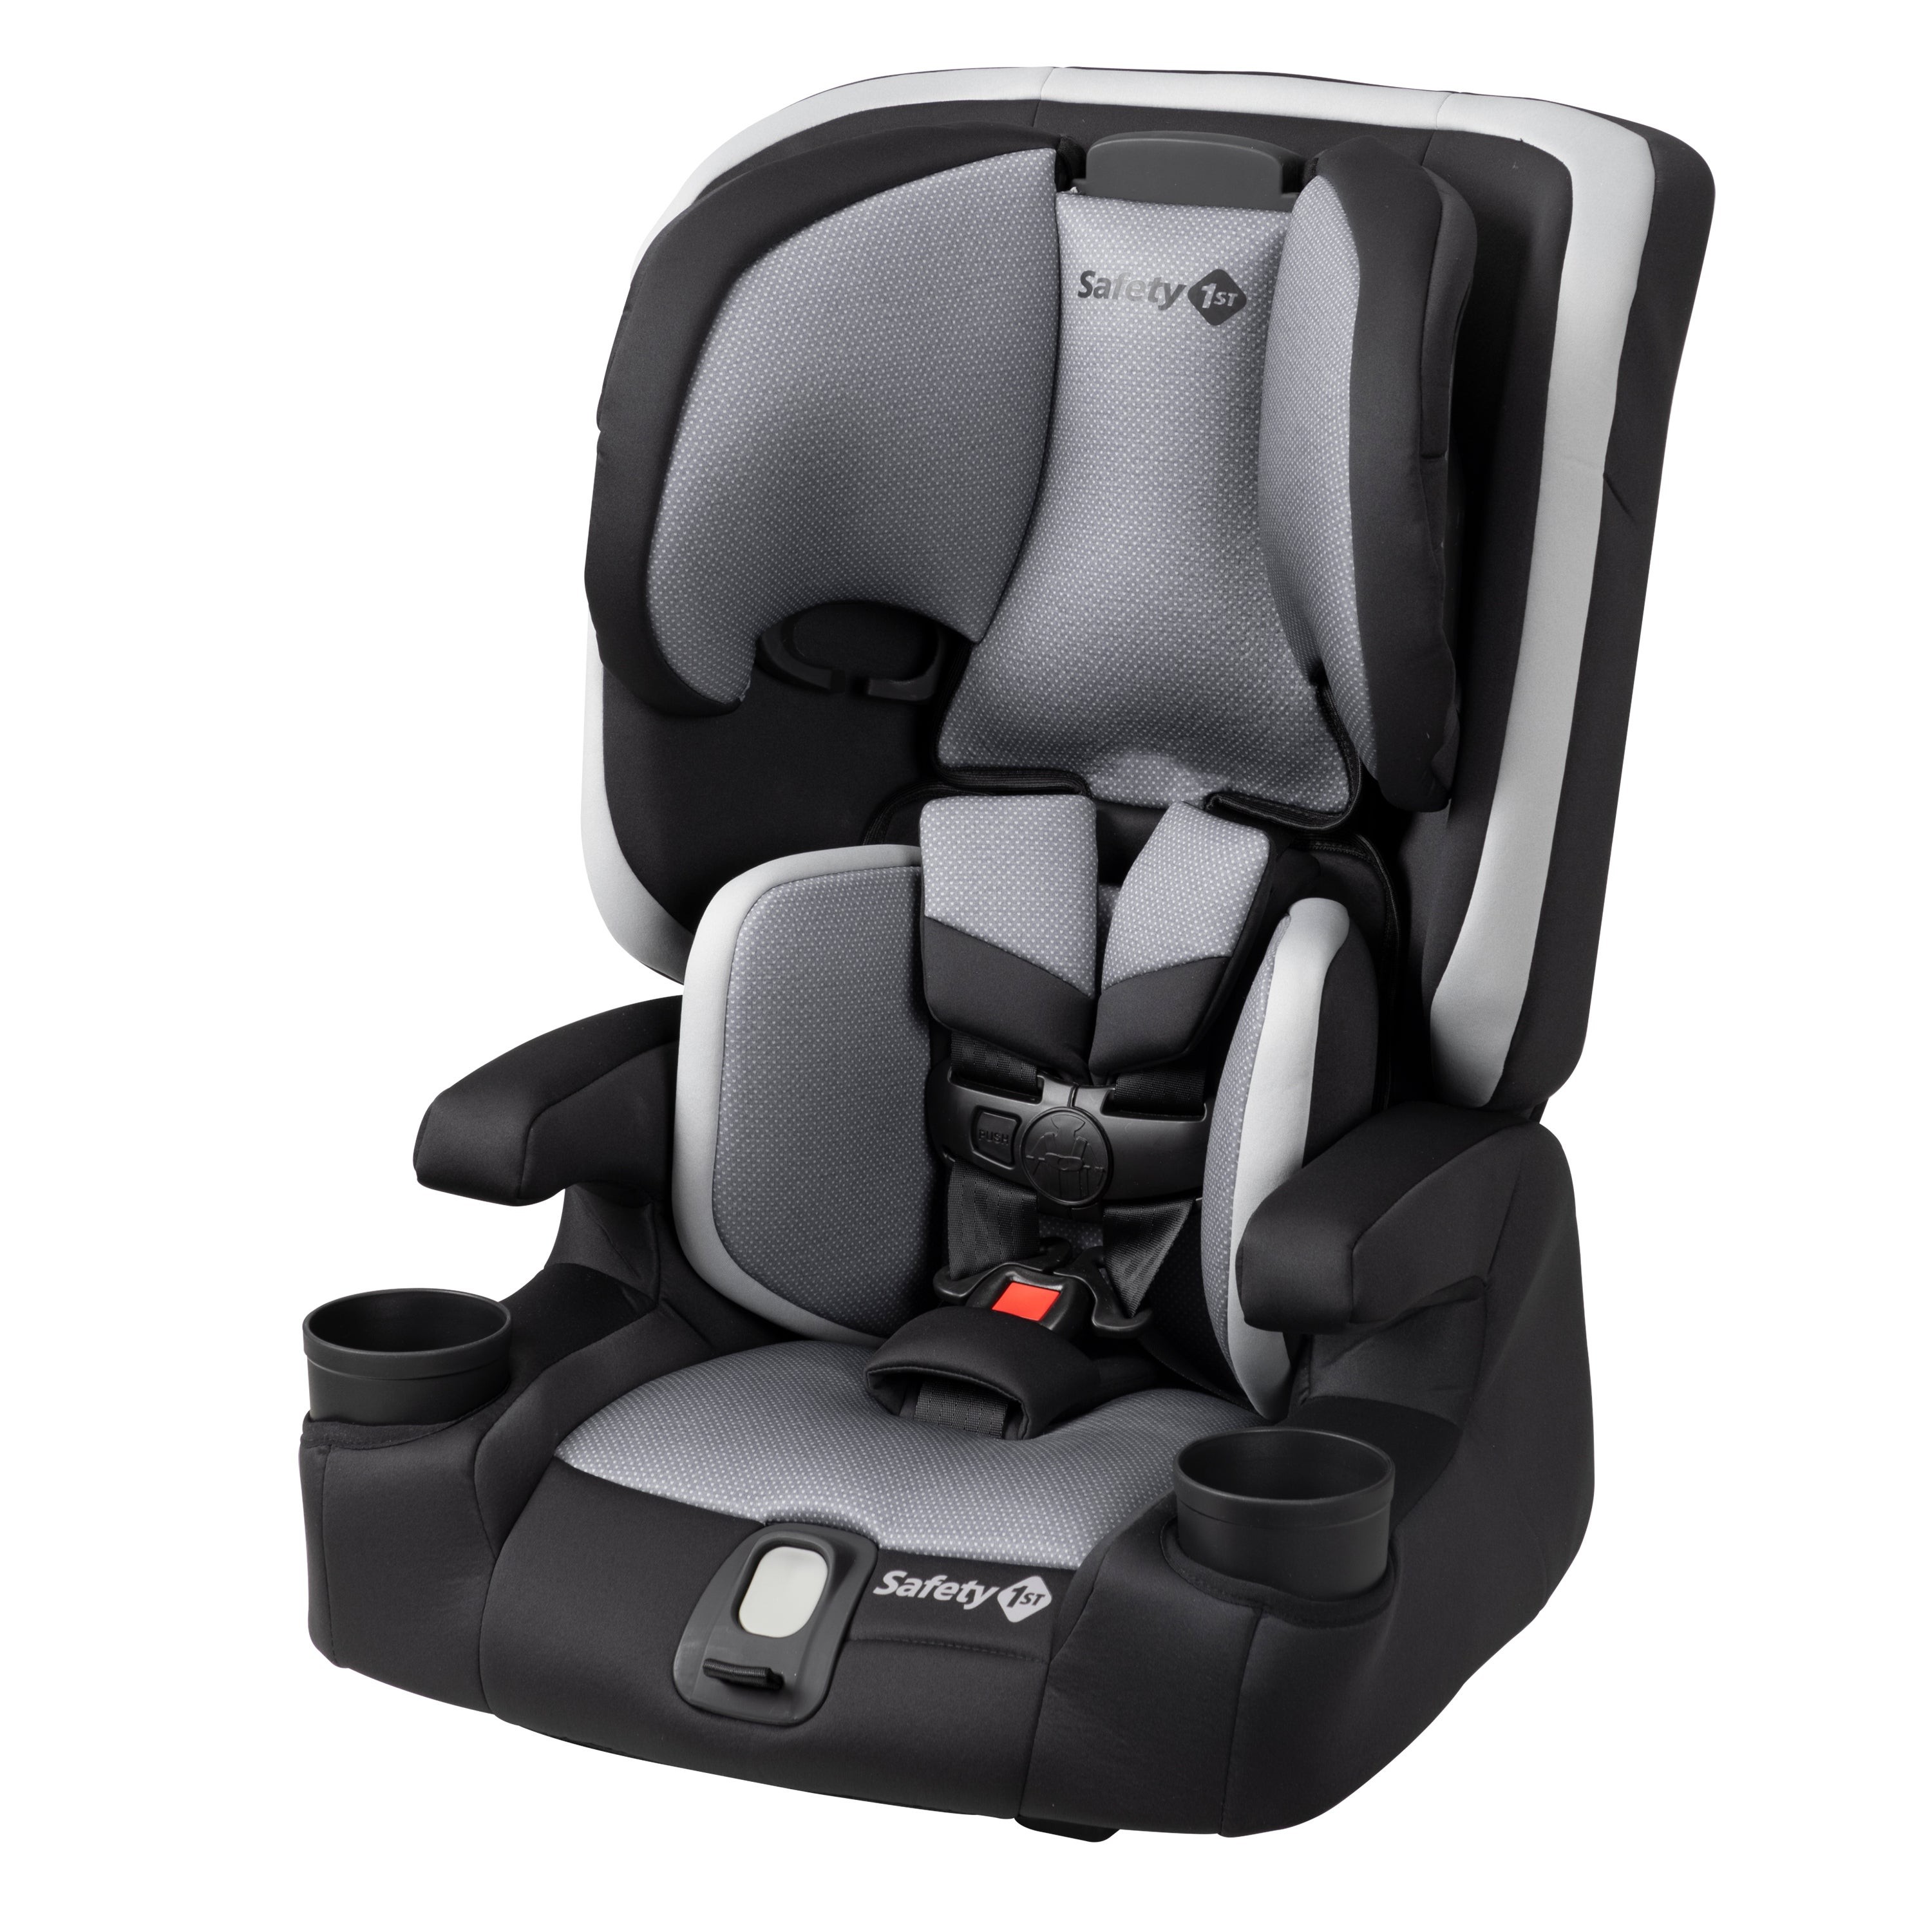 Boost-and-Go All-in-One Harness Booster Car Seat High Street